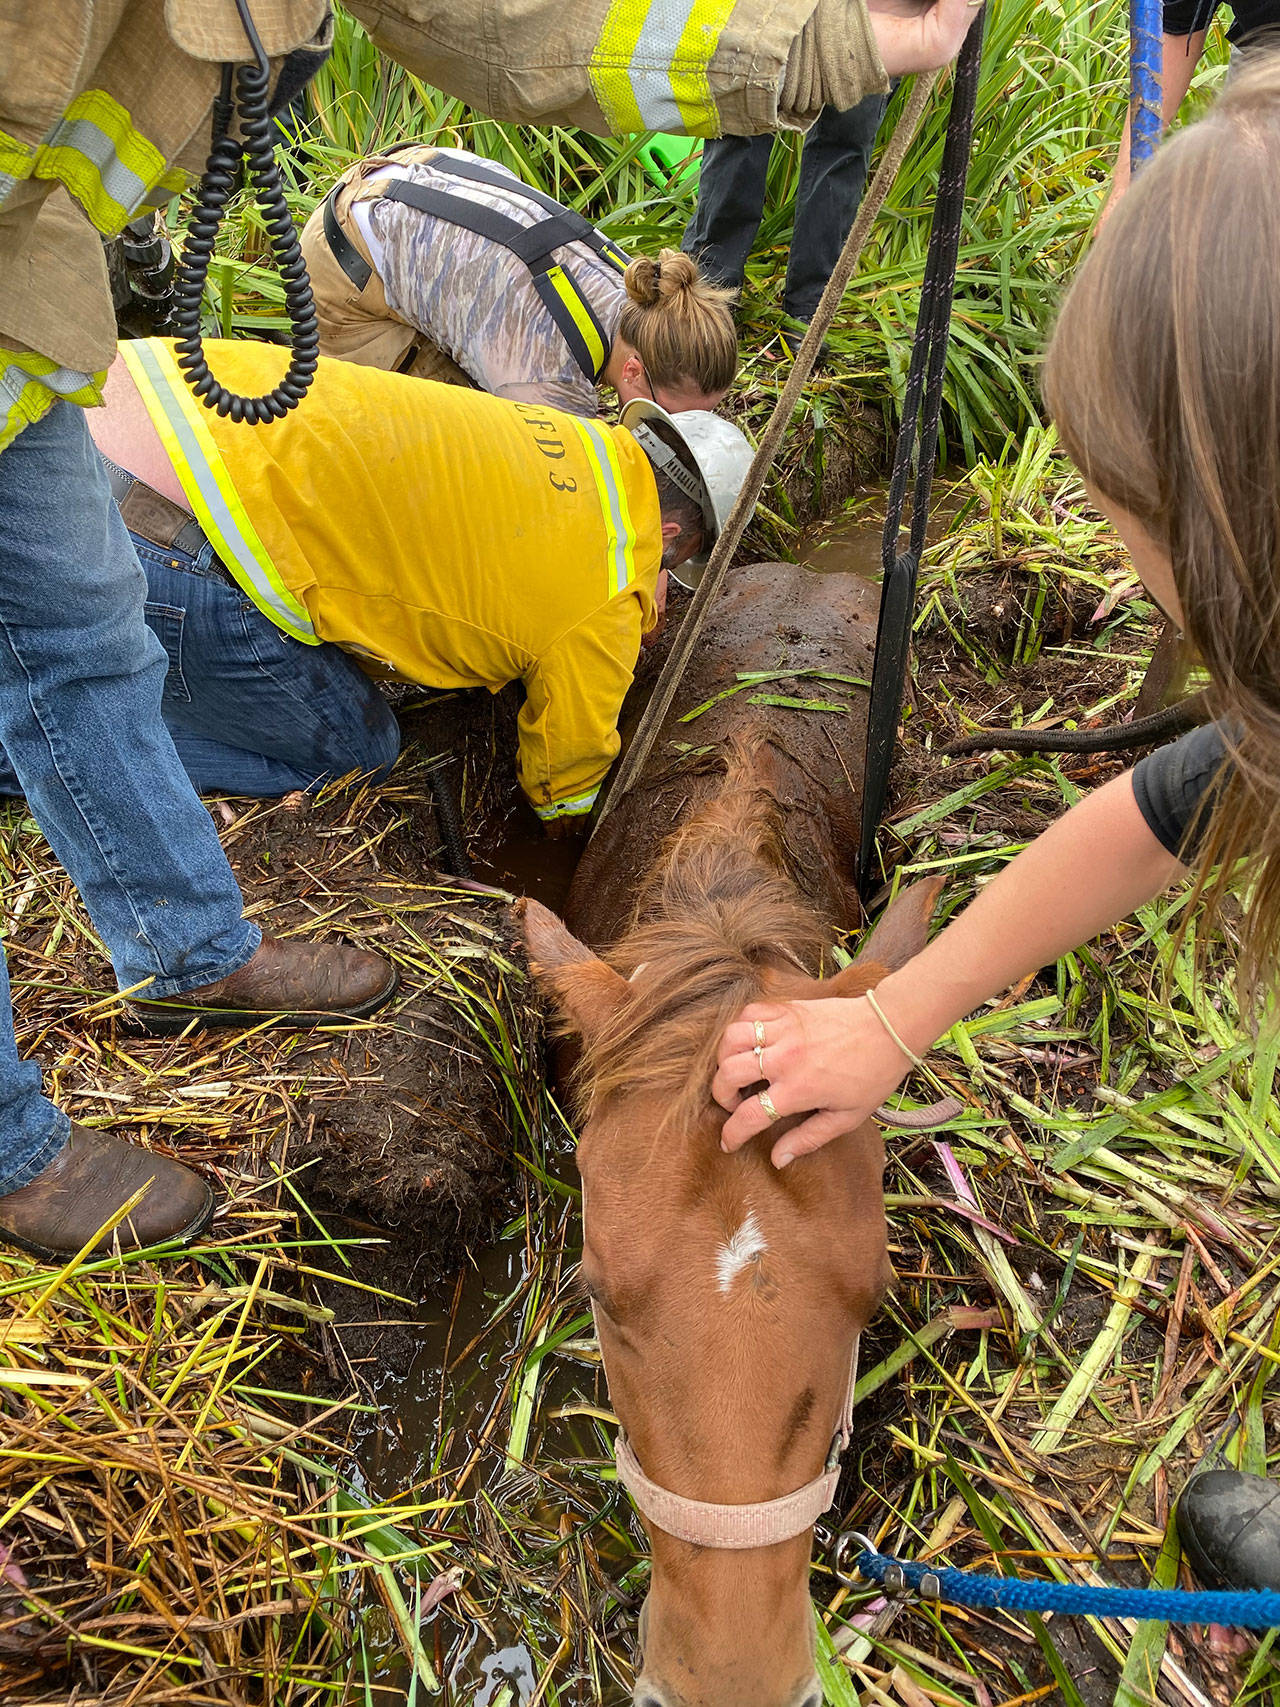 South Whidbey Fire/EMS personnel work Sunday to remove a horse stuck in the mud. (Contributed photo)